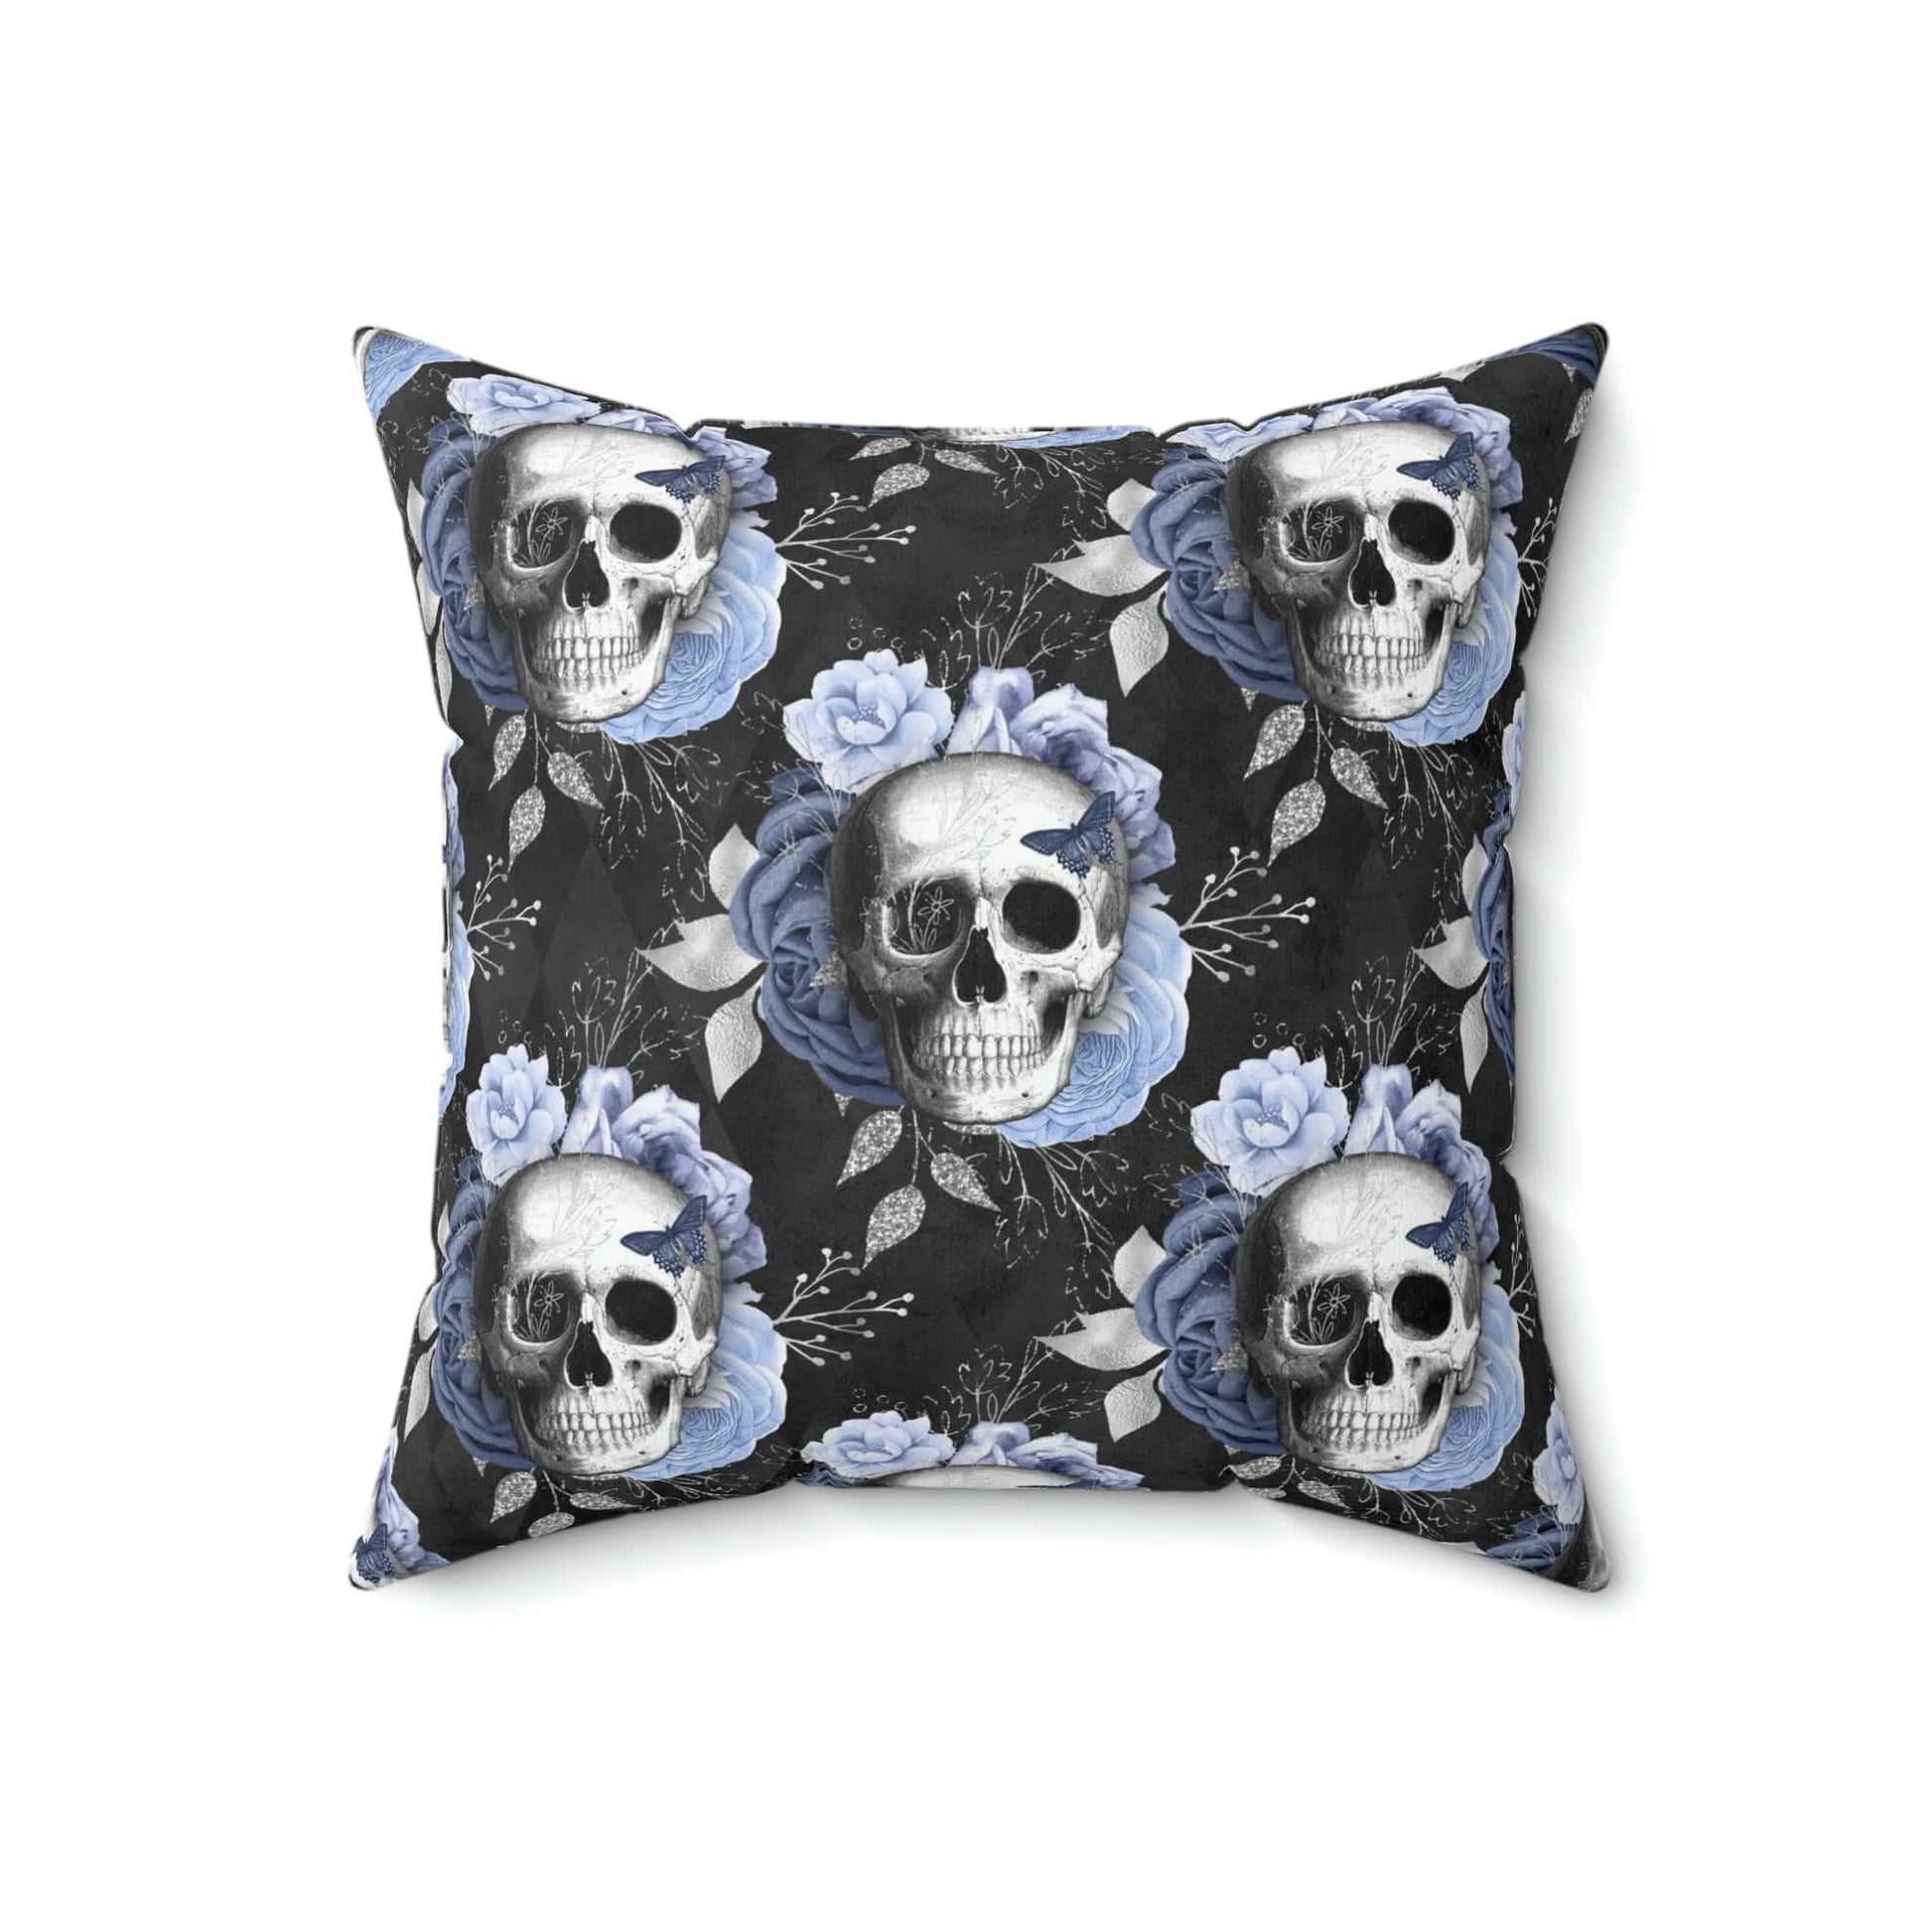 Kate McEnroe New York Floral Skull Square Pillow Cover Throw Pillow Covers 18" × 18" 3549442682